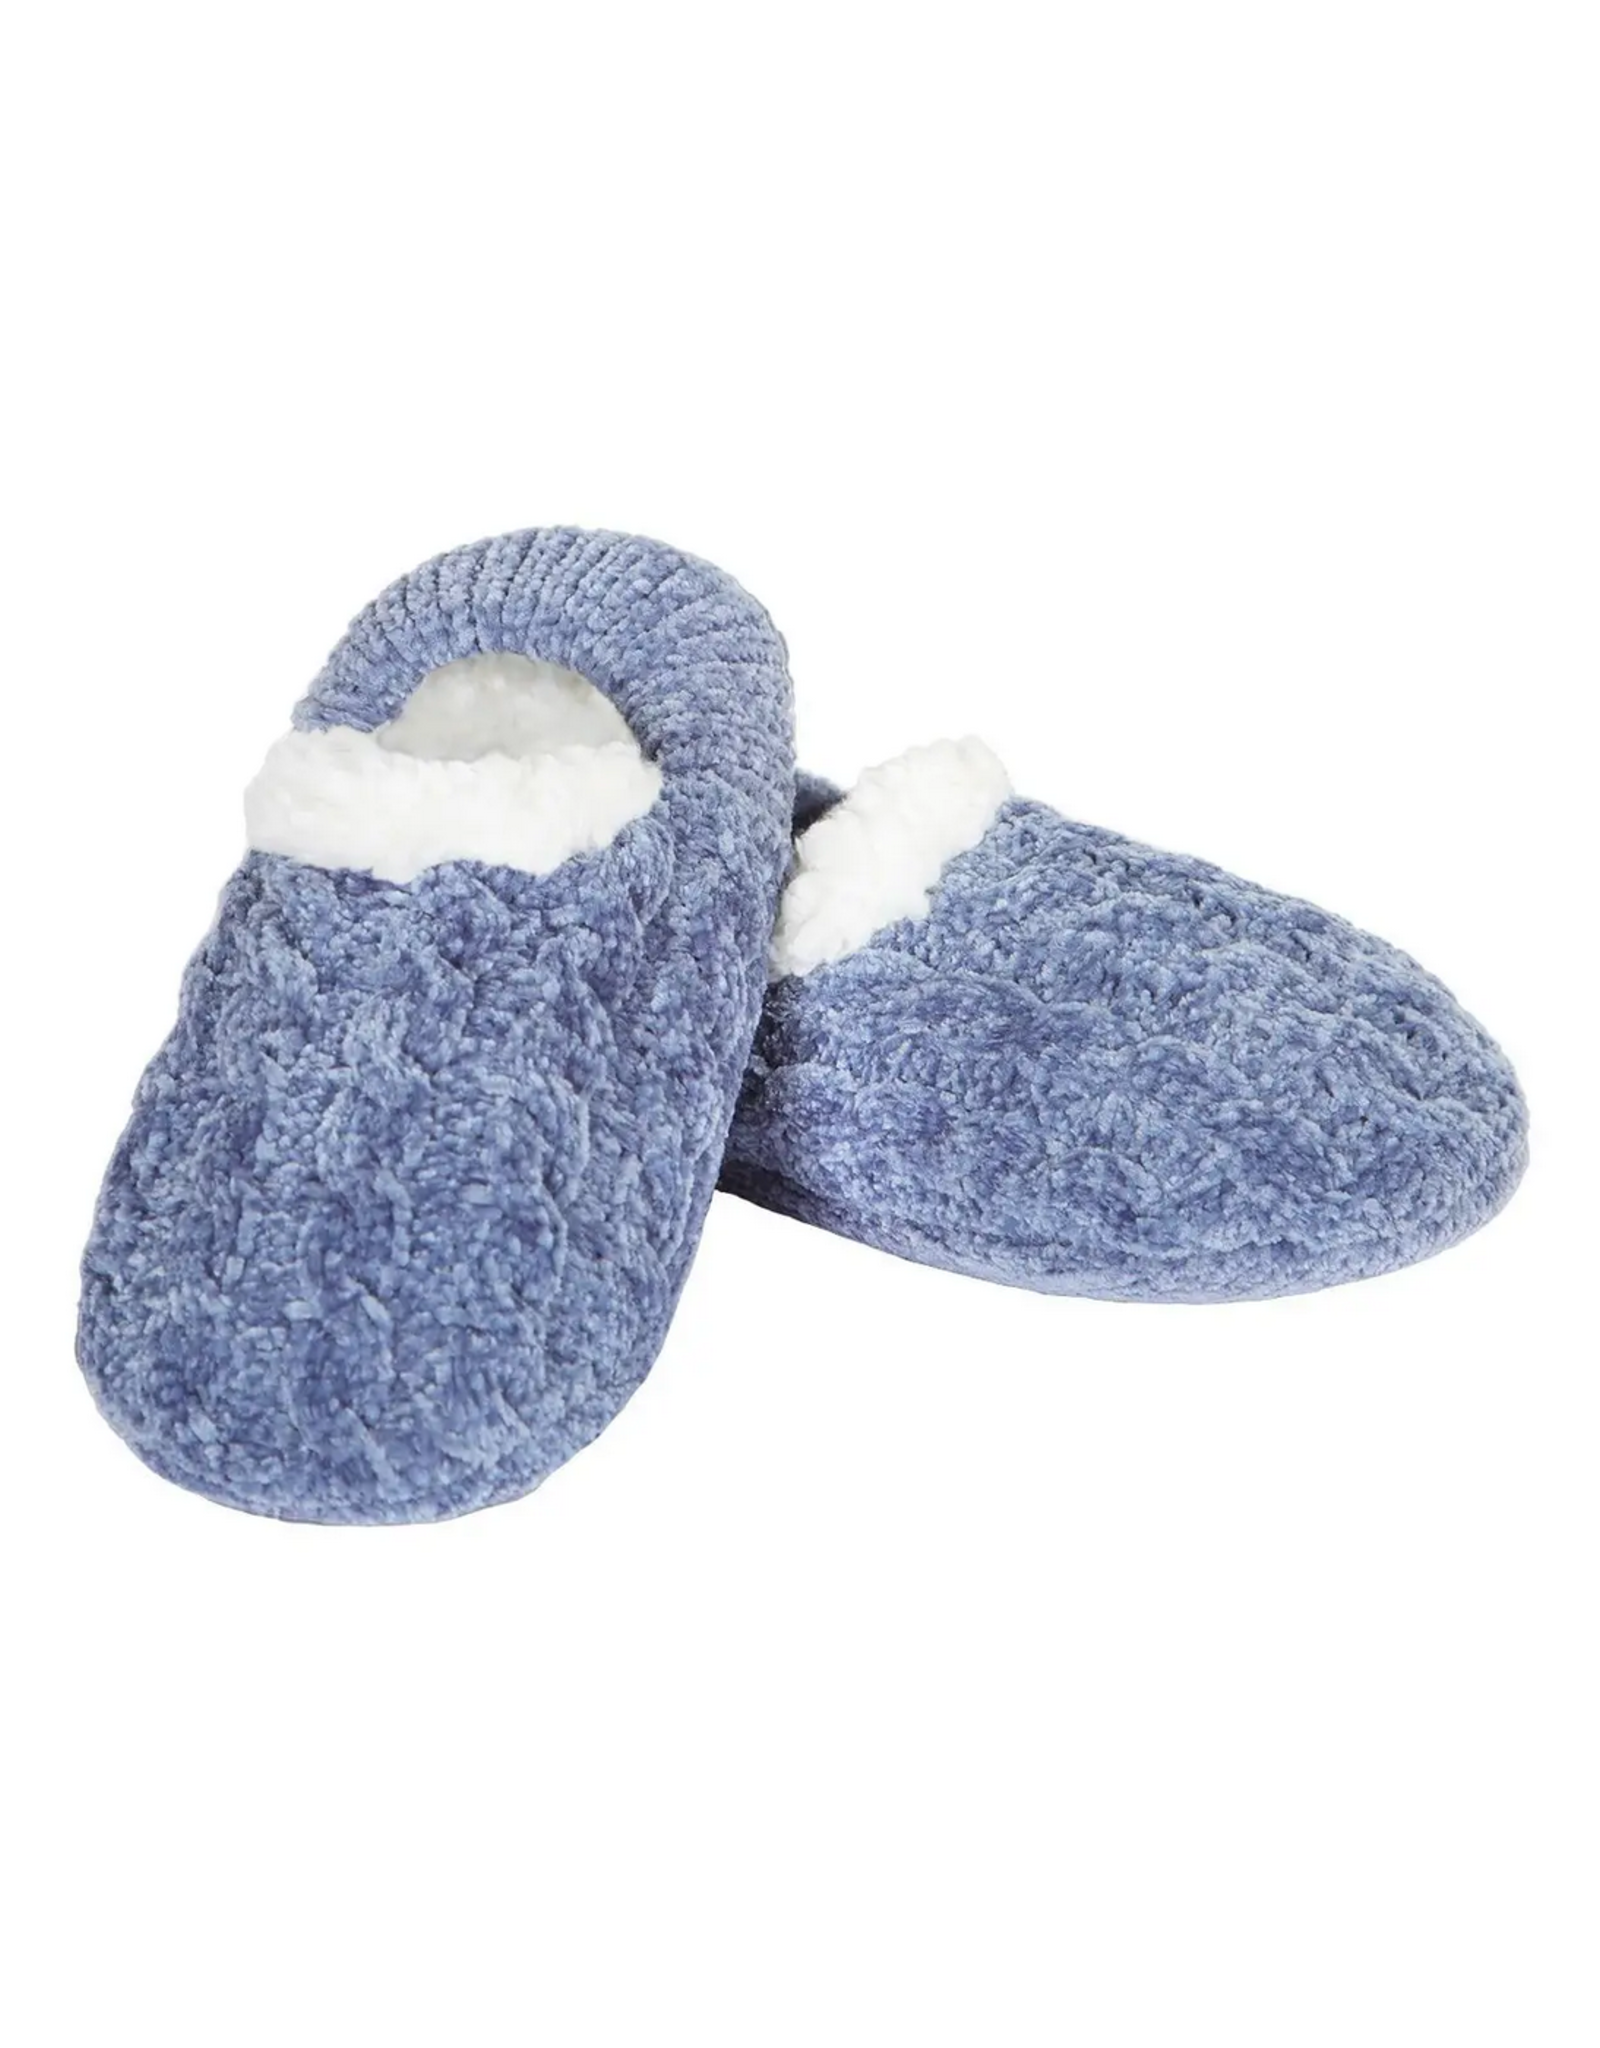 Me Moi Cable Knit Chenille Slipper